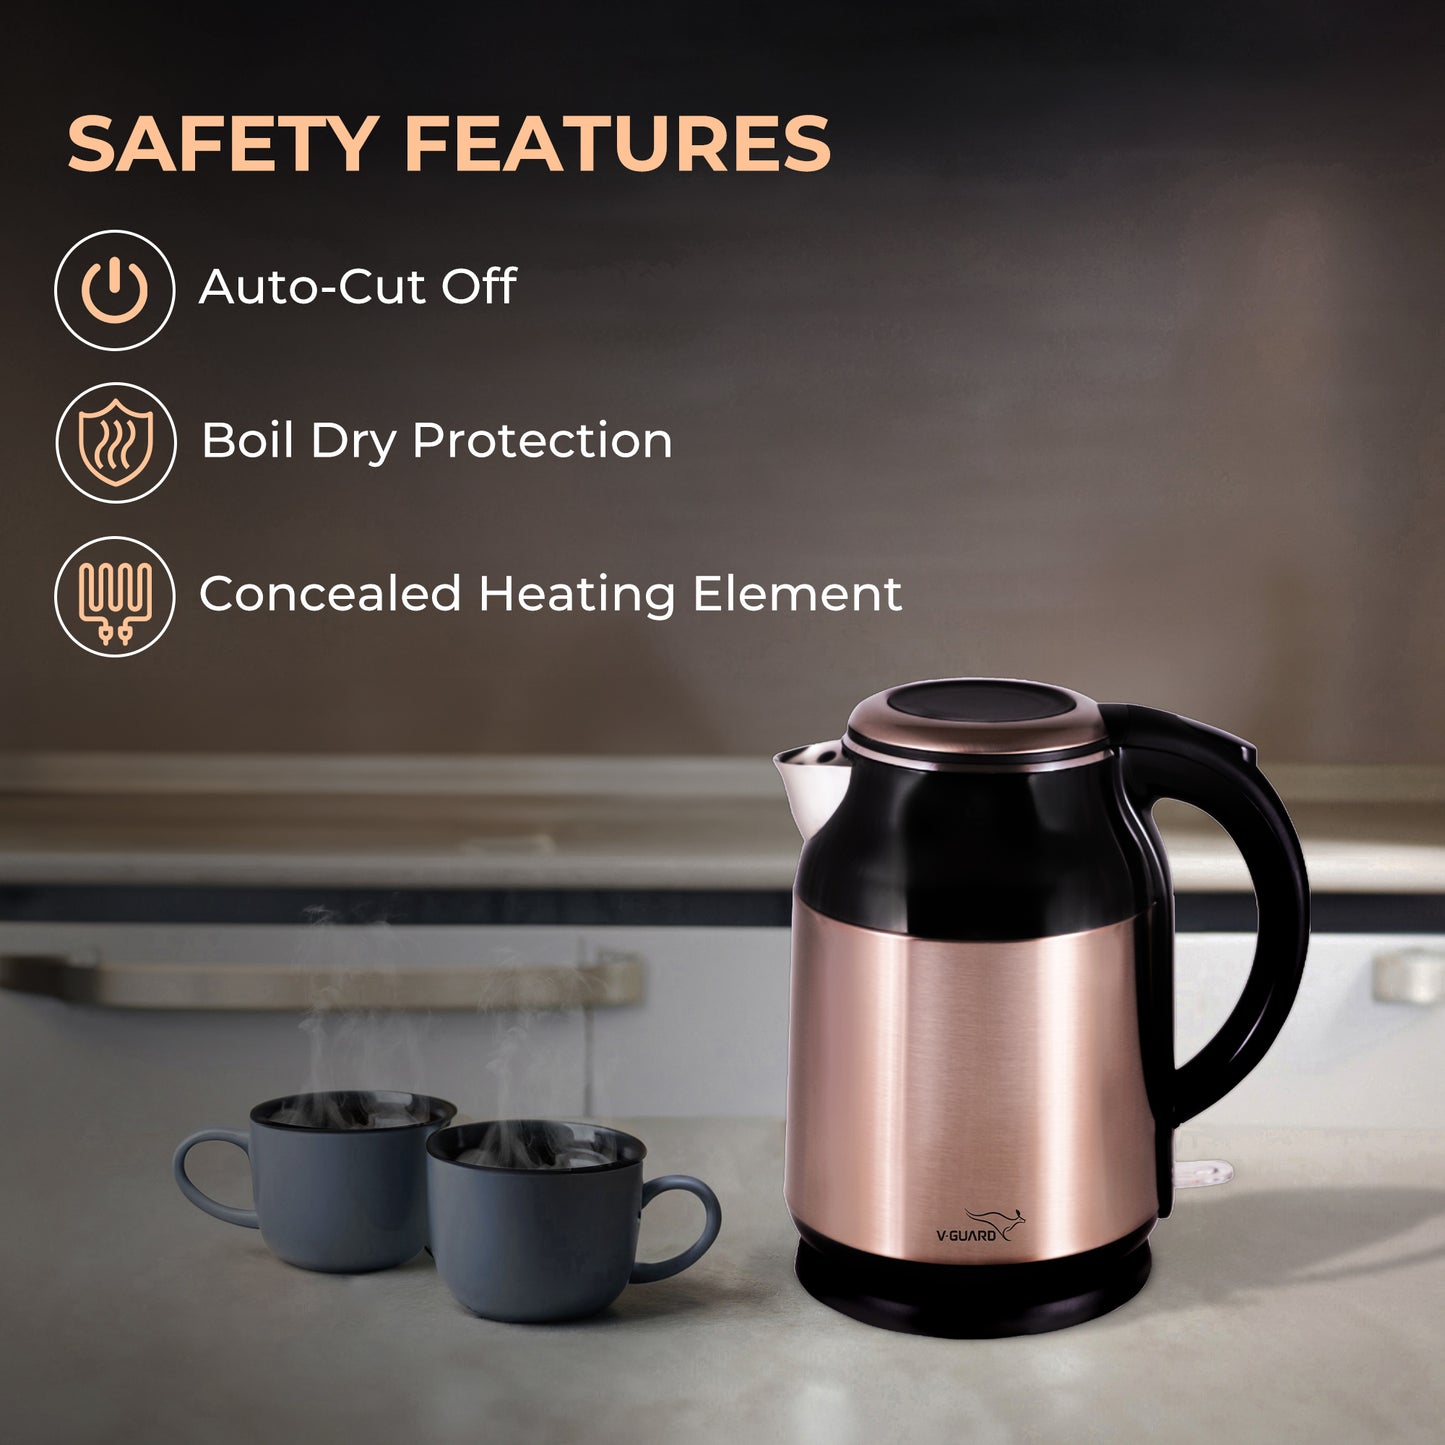 VKS17 Prime Electric Kettle for hot water | 1.7 Litre | Cool Touch Double Wall | 2 year warranty|Fast Boiling | Auto cut-off